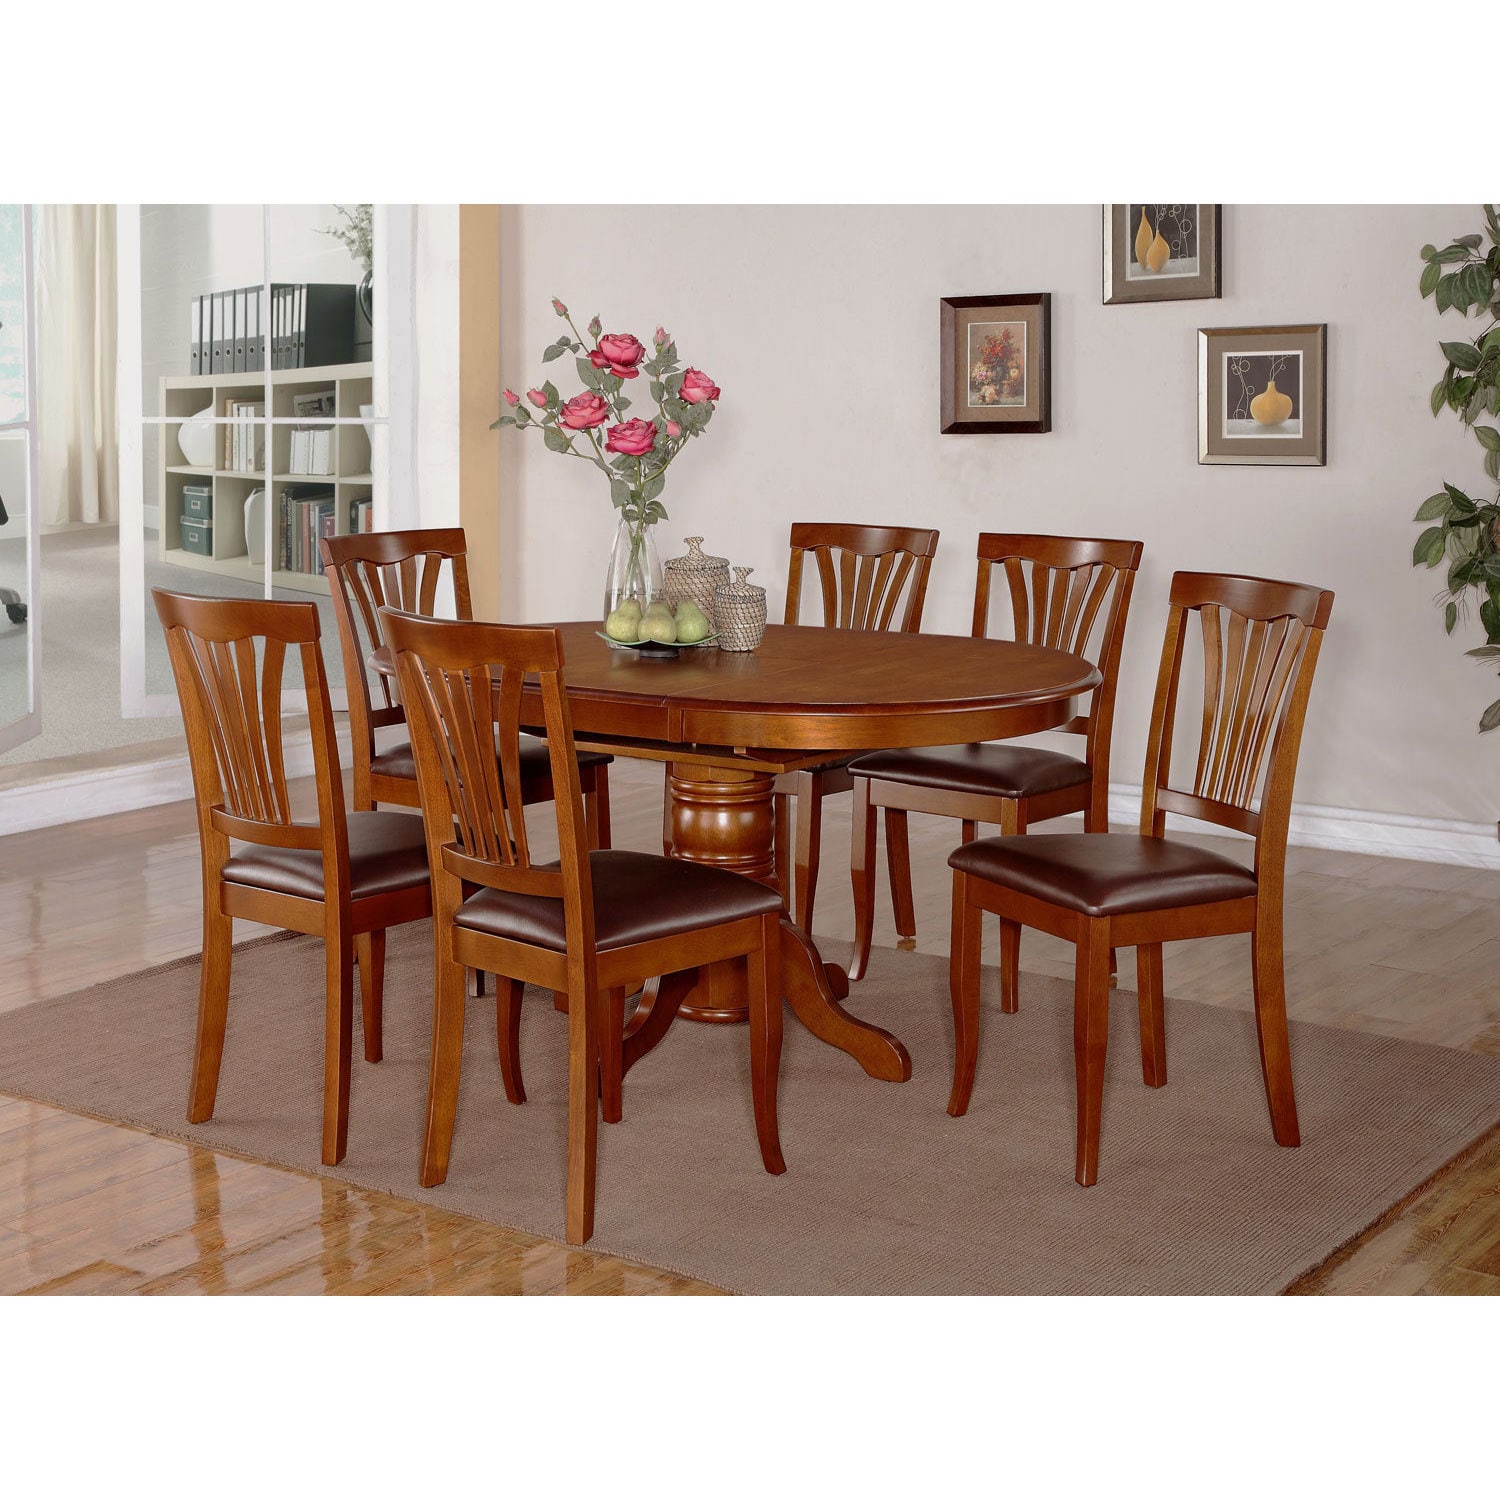 7-piece Oval Dining Room Table with Leaf and 6 Dining Chairs Brown Faux